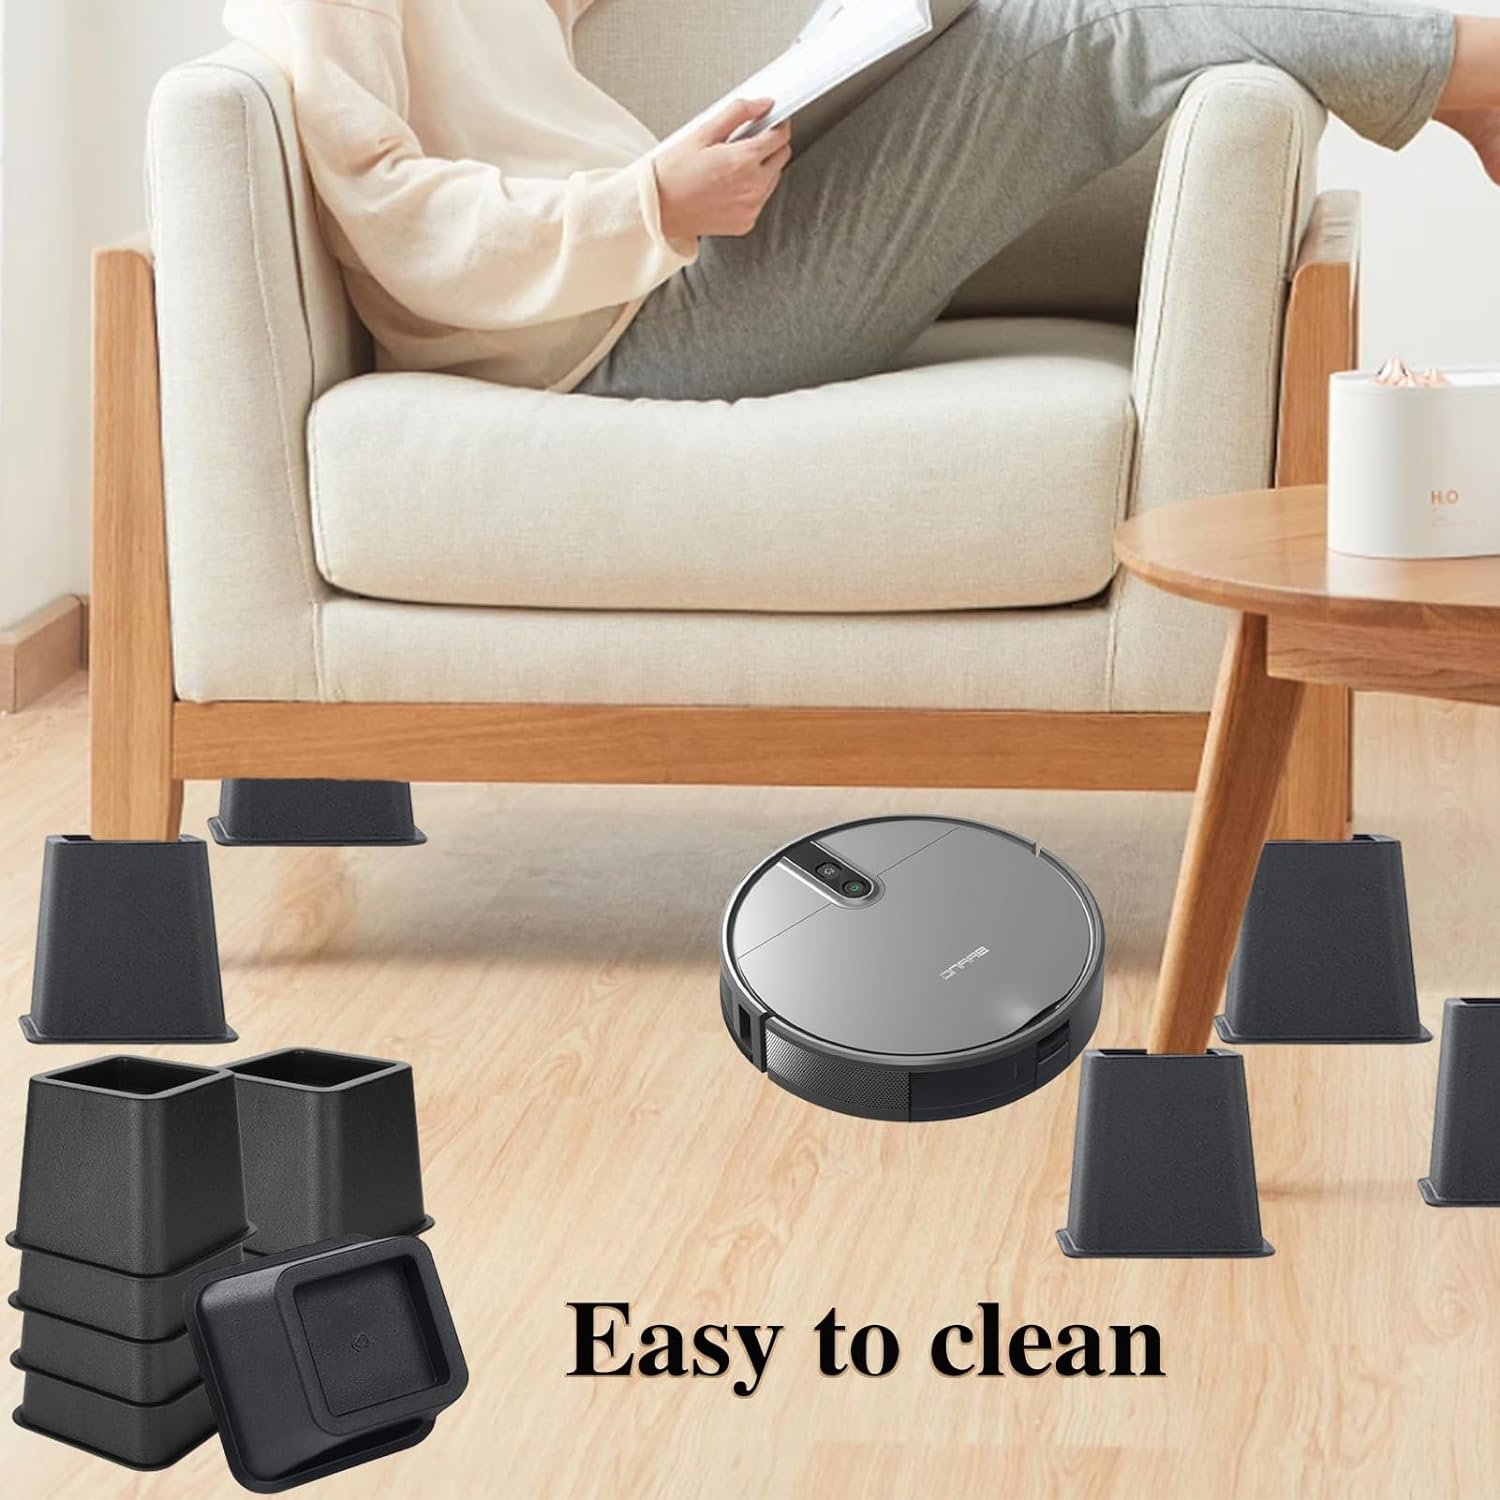 Bed Risers 3 Inch/5Inch, Heavy Duty Furniture Risers, Bed Elevators for Sofa Desk Chair, Lifts Up to 1,500 lb, Set of 9/8, Black (3inch)